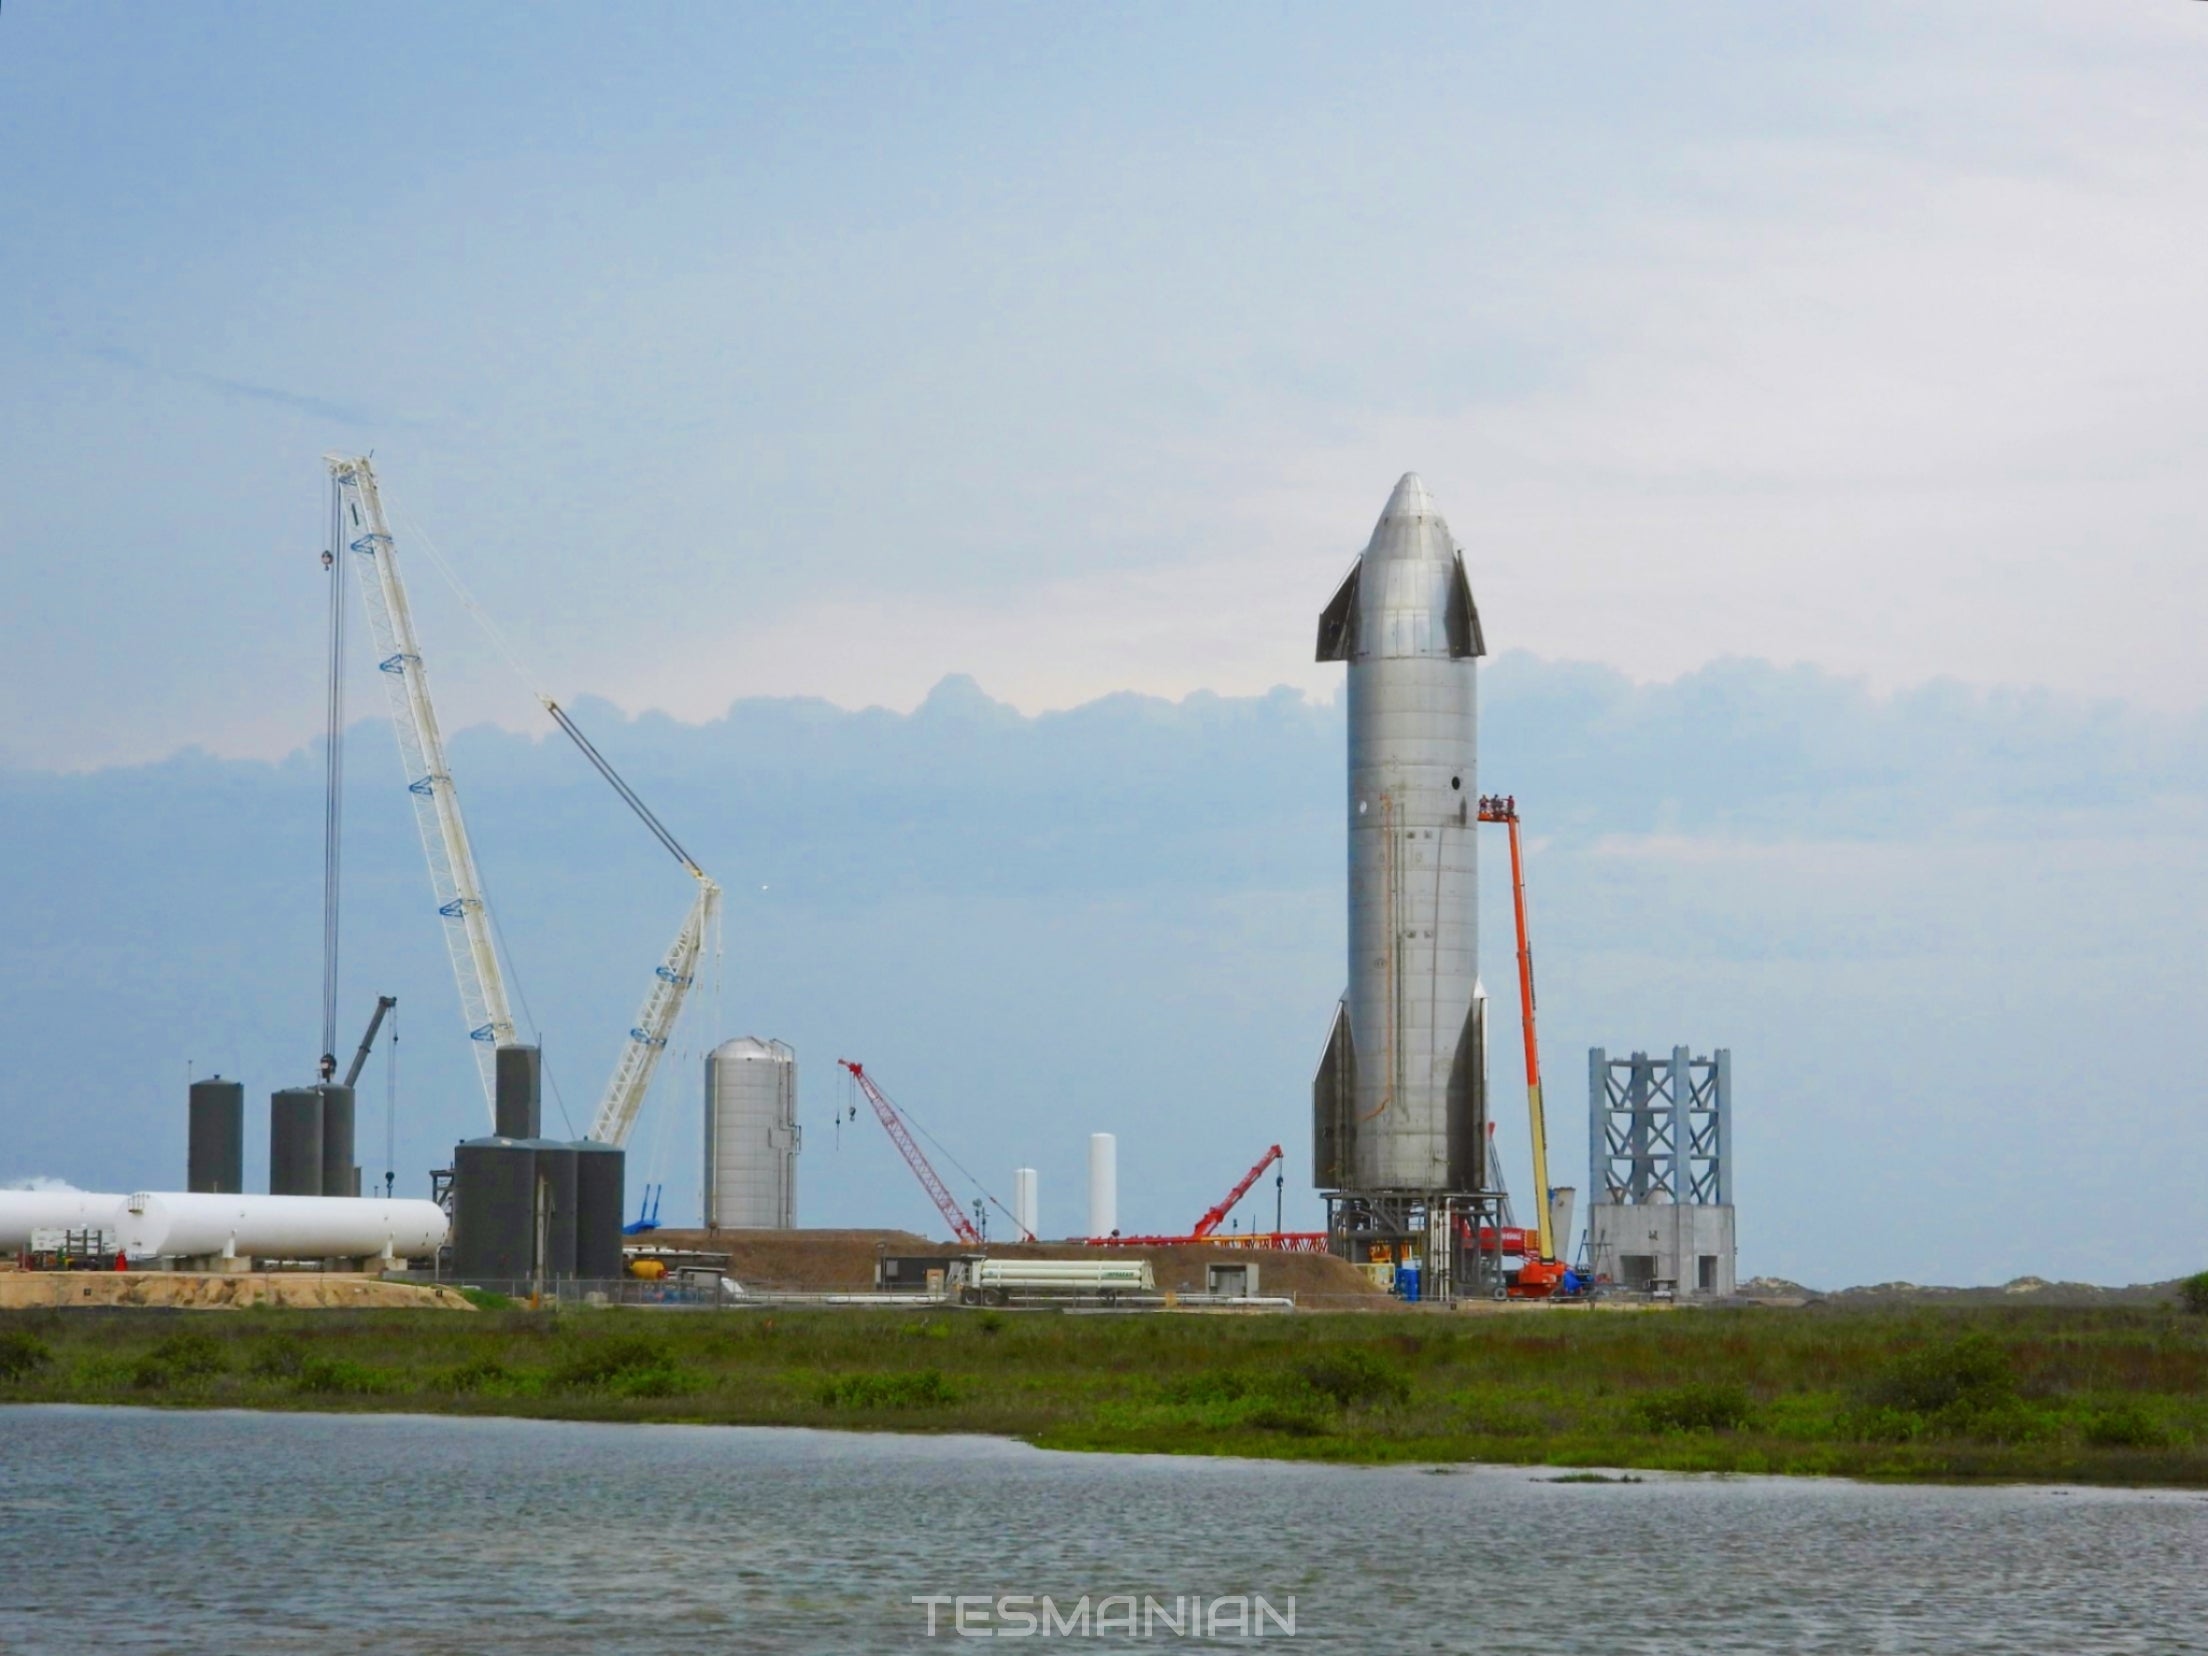 SpaceX Is Building Starship's Orbital Launch Tower Ahead Of Potential Test Flight To Orbit This Summer